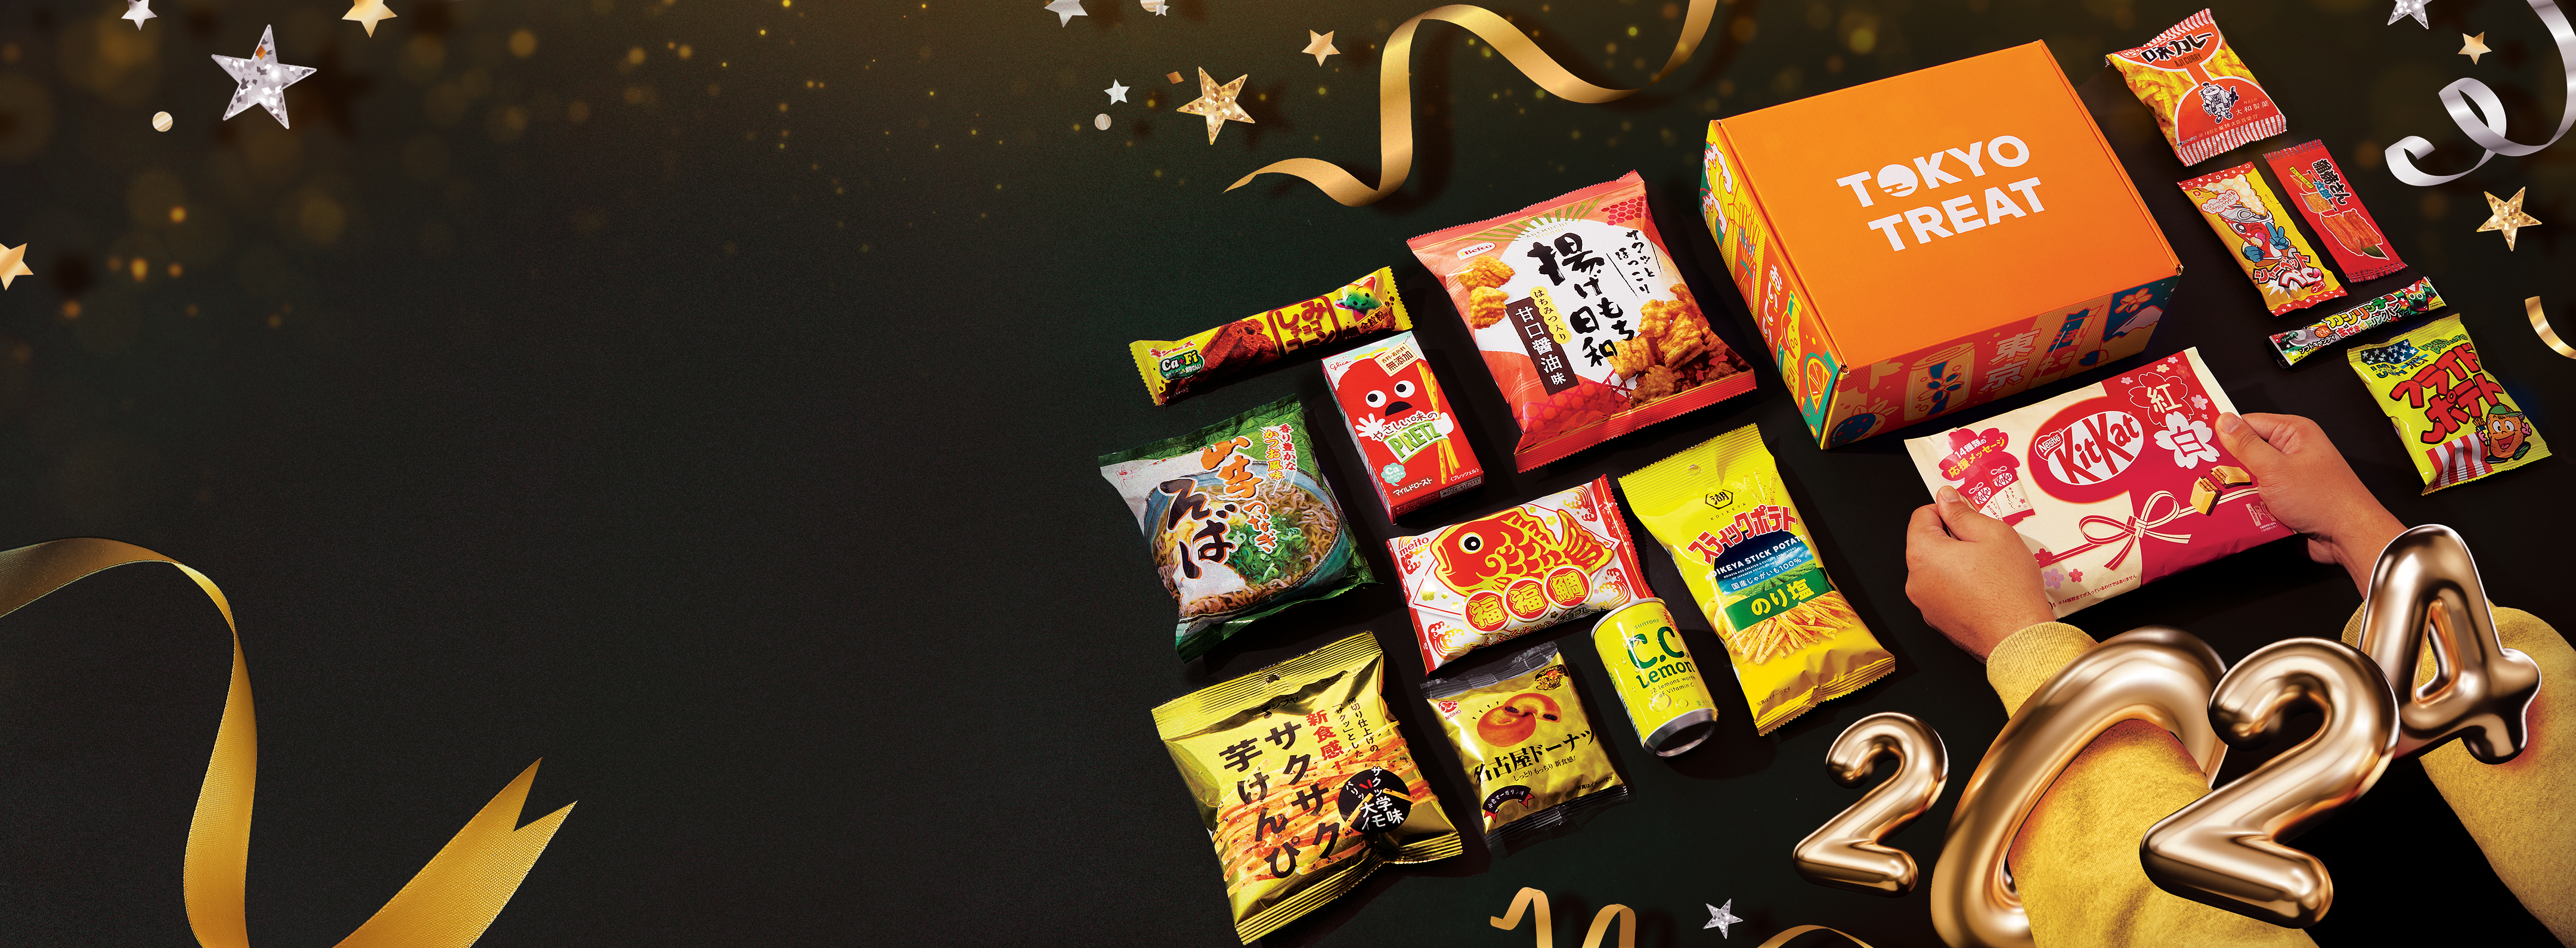 TokyoTreat box sits against a dark backdrop, surrounded by box items and New Year's motifs.